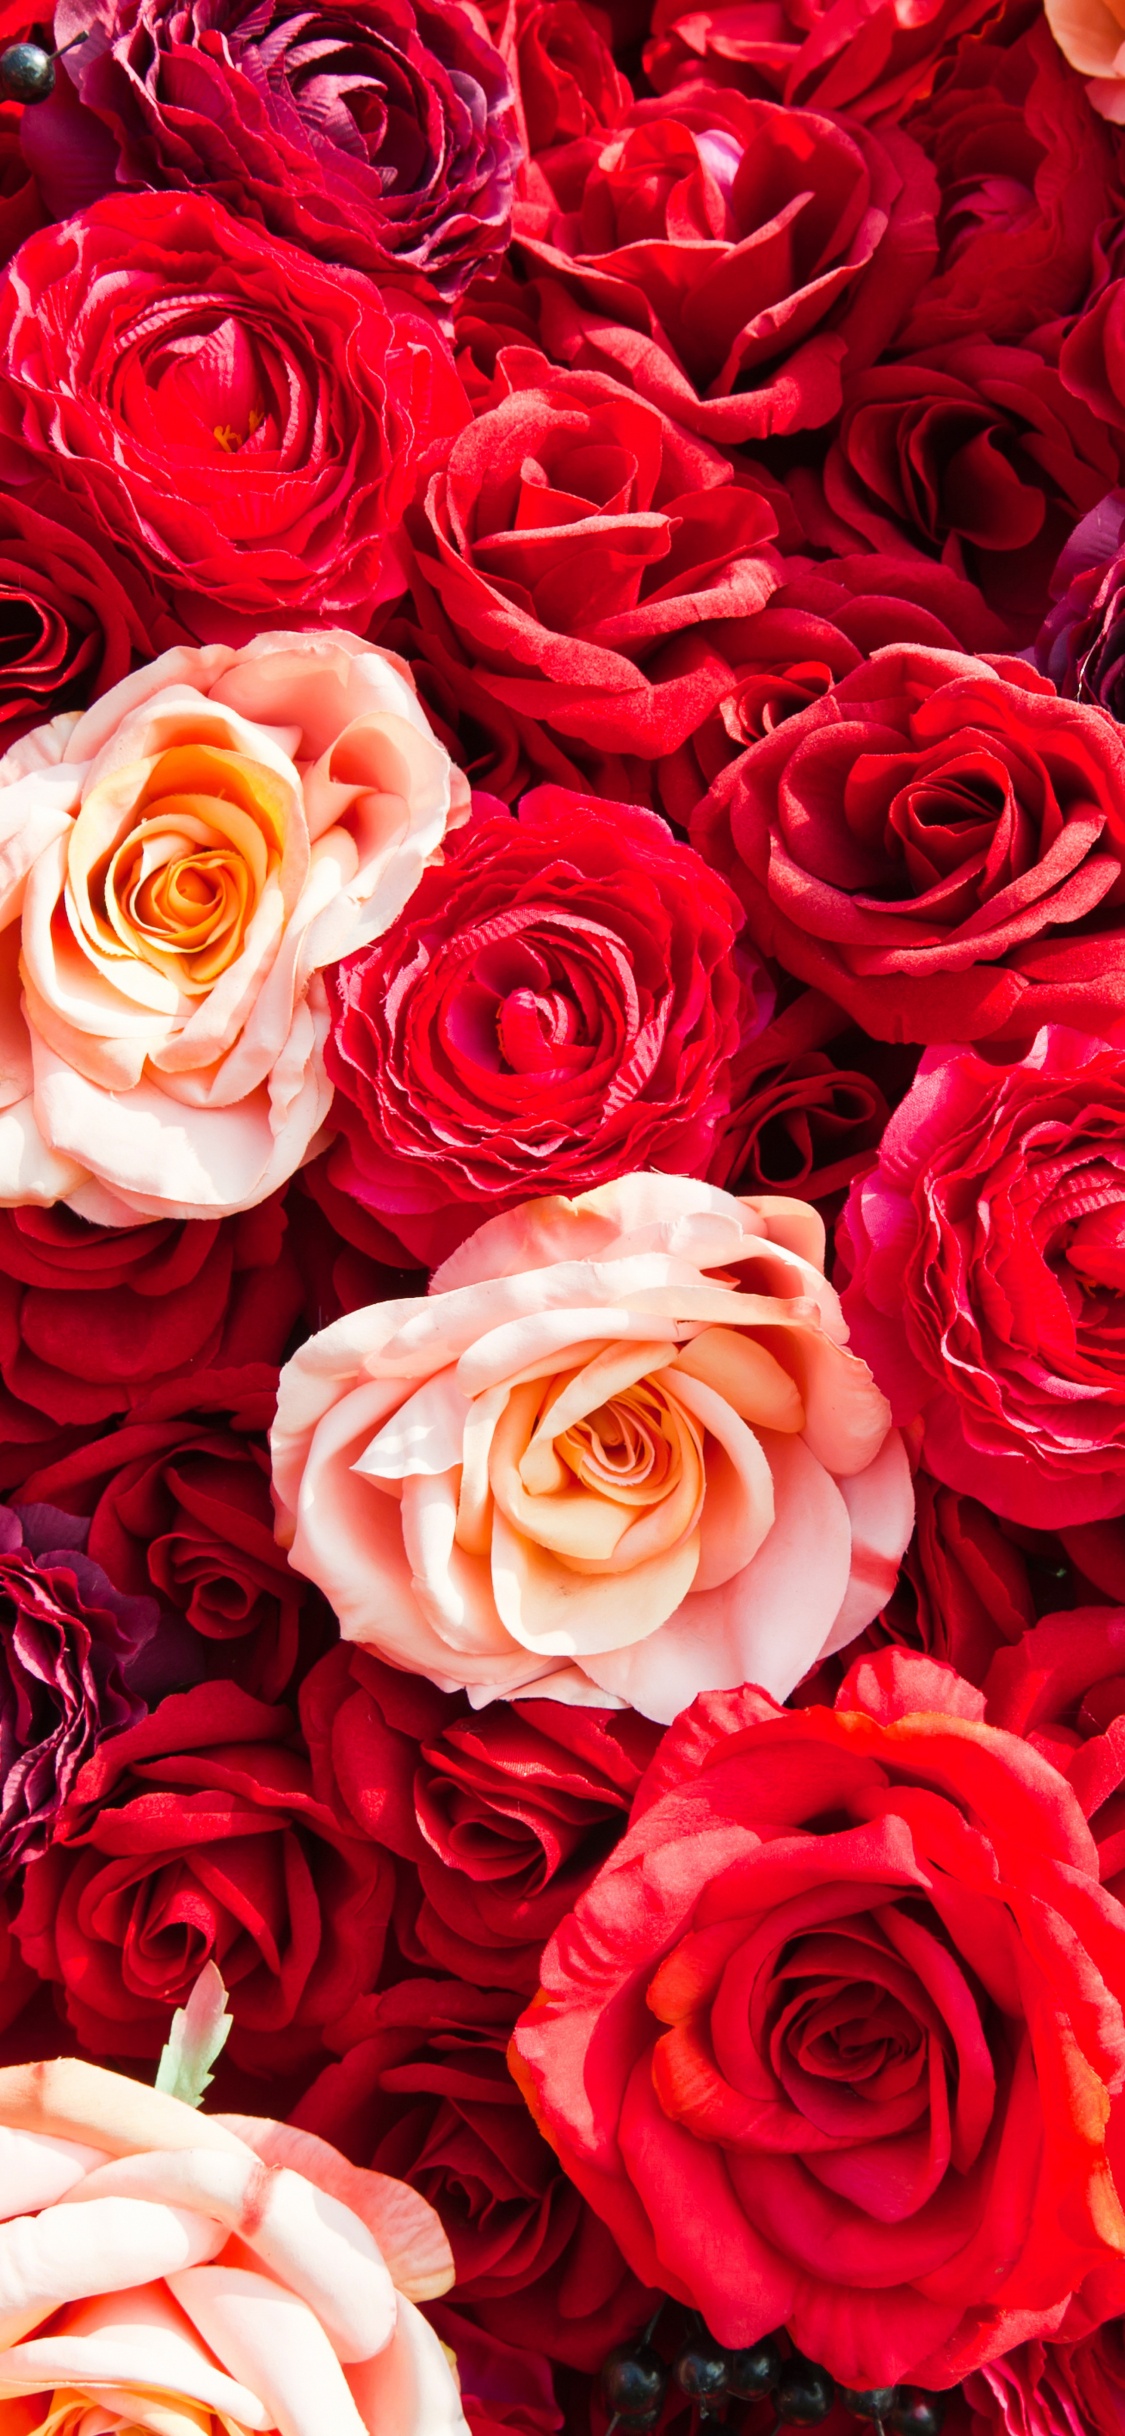 Red and White Roses Bouquet. Wallpaper in 1125x2436 Resolution